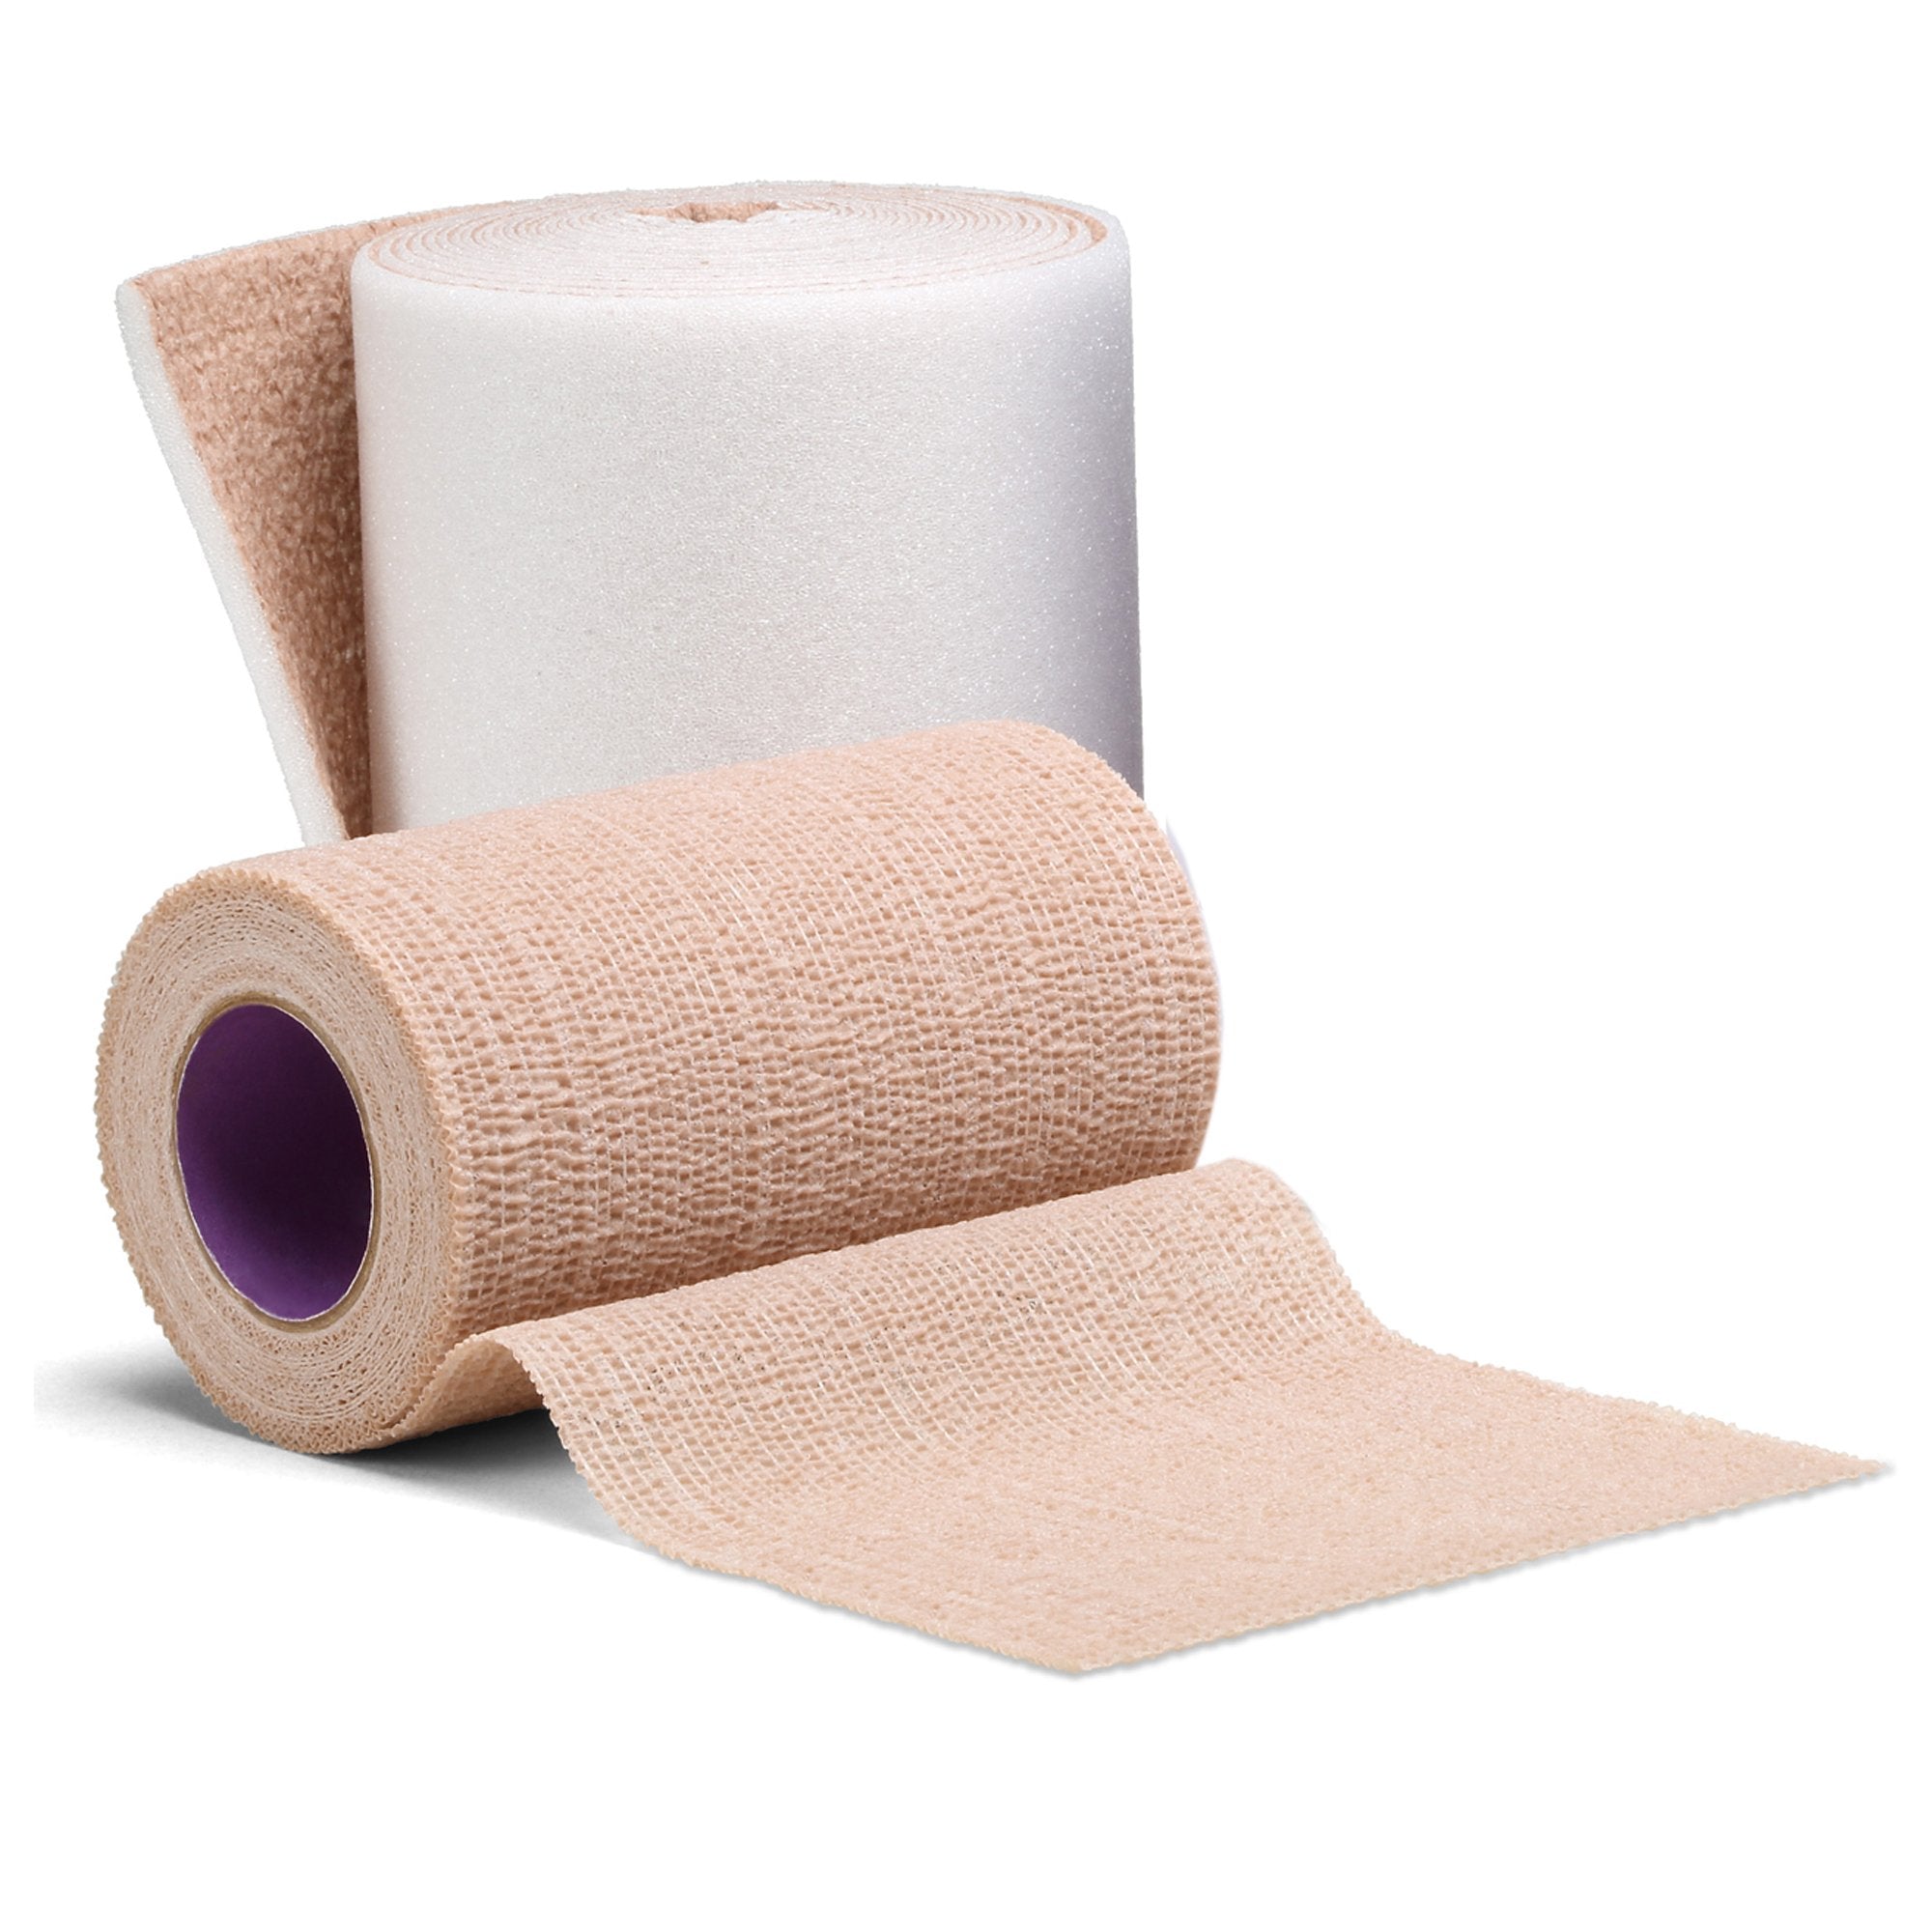 2 Layer Compression Bandage System 3M Coban 2 4 Inch X 3-4/5 Yard / 4 Inch X 6-3/10 Yard 35 to 40 mmHg Self-adherent / Pull On Closure Tan / White NonSterile